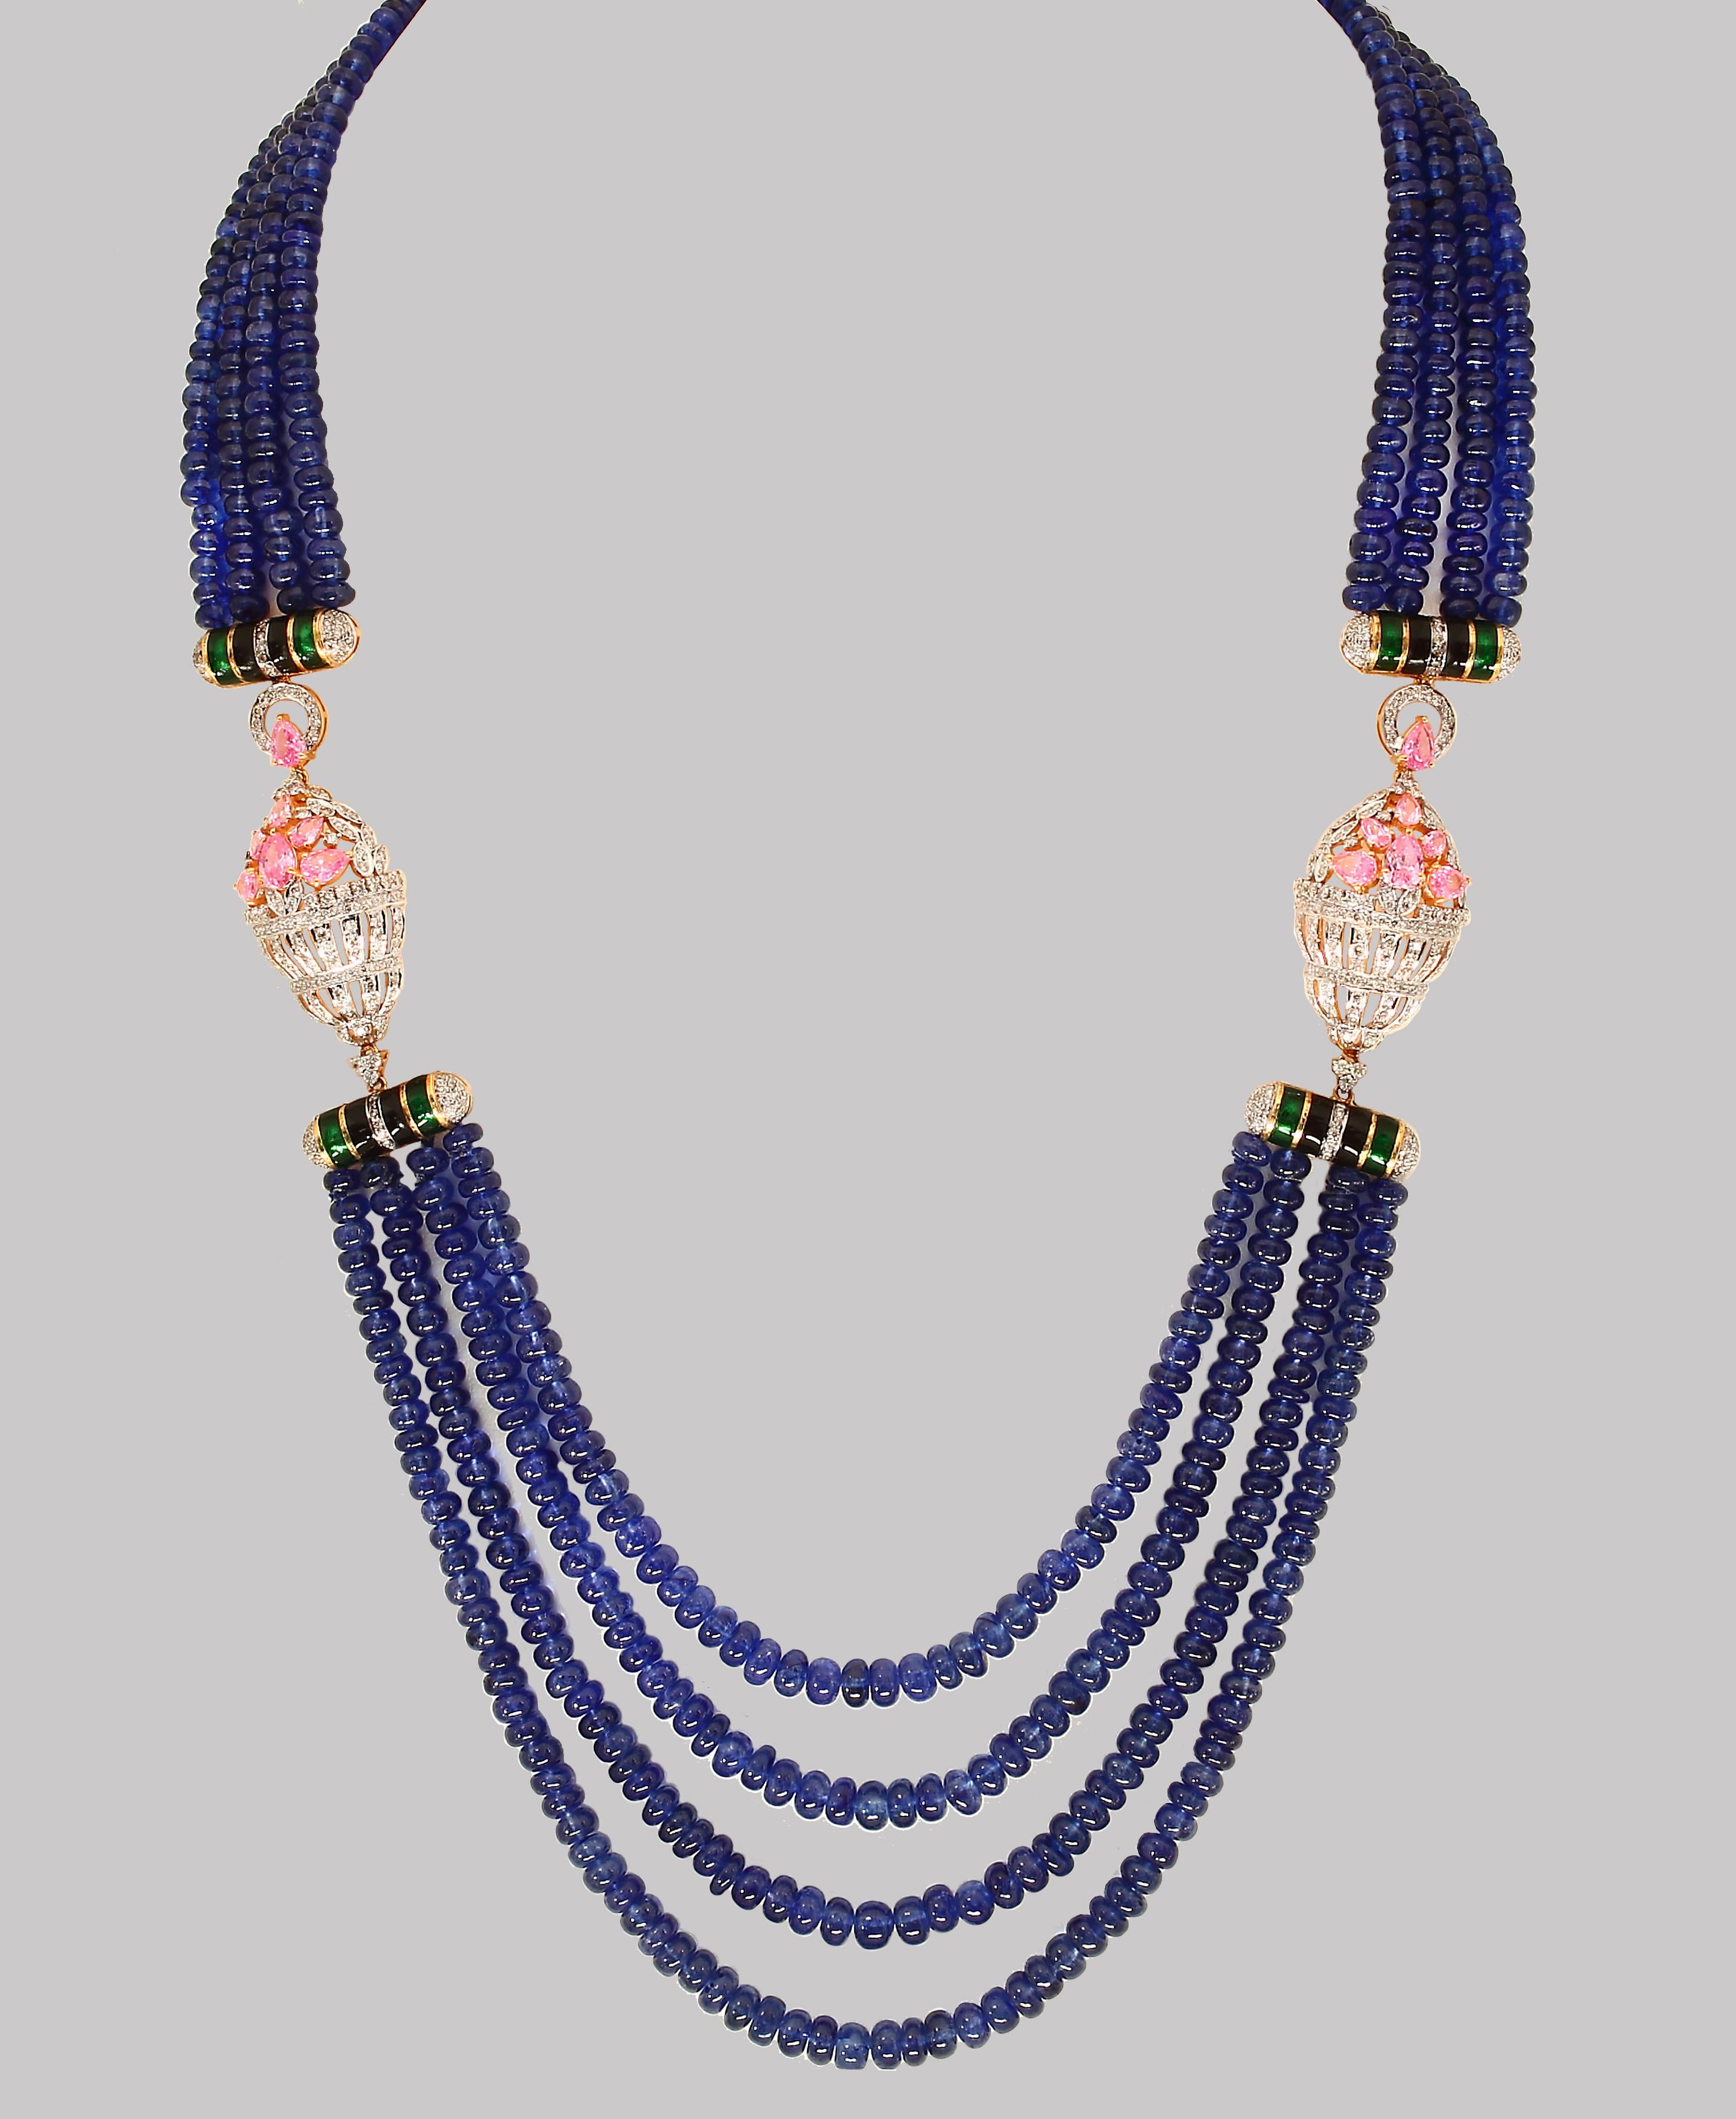  575 Ct Natural Tanzanite Bead Four Strand Necklace With 6.5 carats of Diamond in 14 Karat Yellow  Gold
All natural beads , no color enhancement
Opera Length
Back Gold clasp is such that you can adjust the length of the necklace  
4 layers of